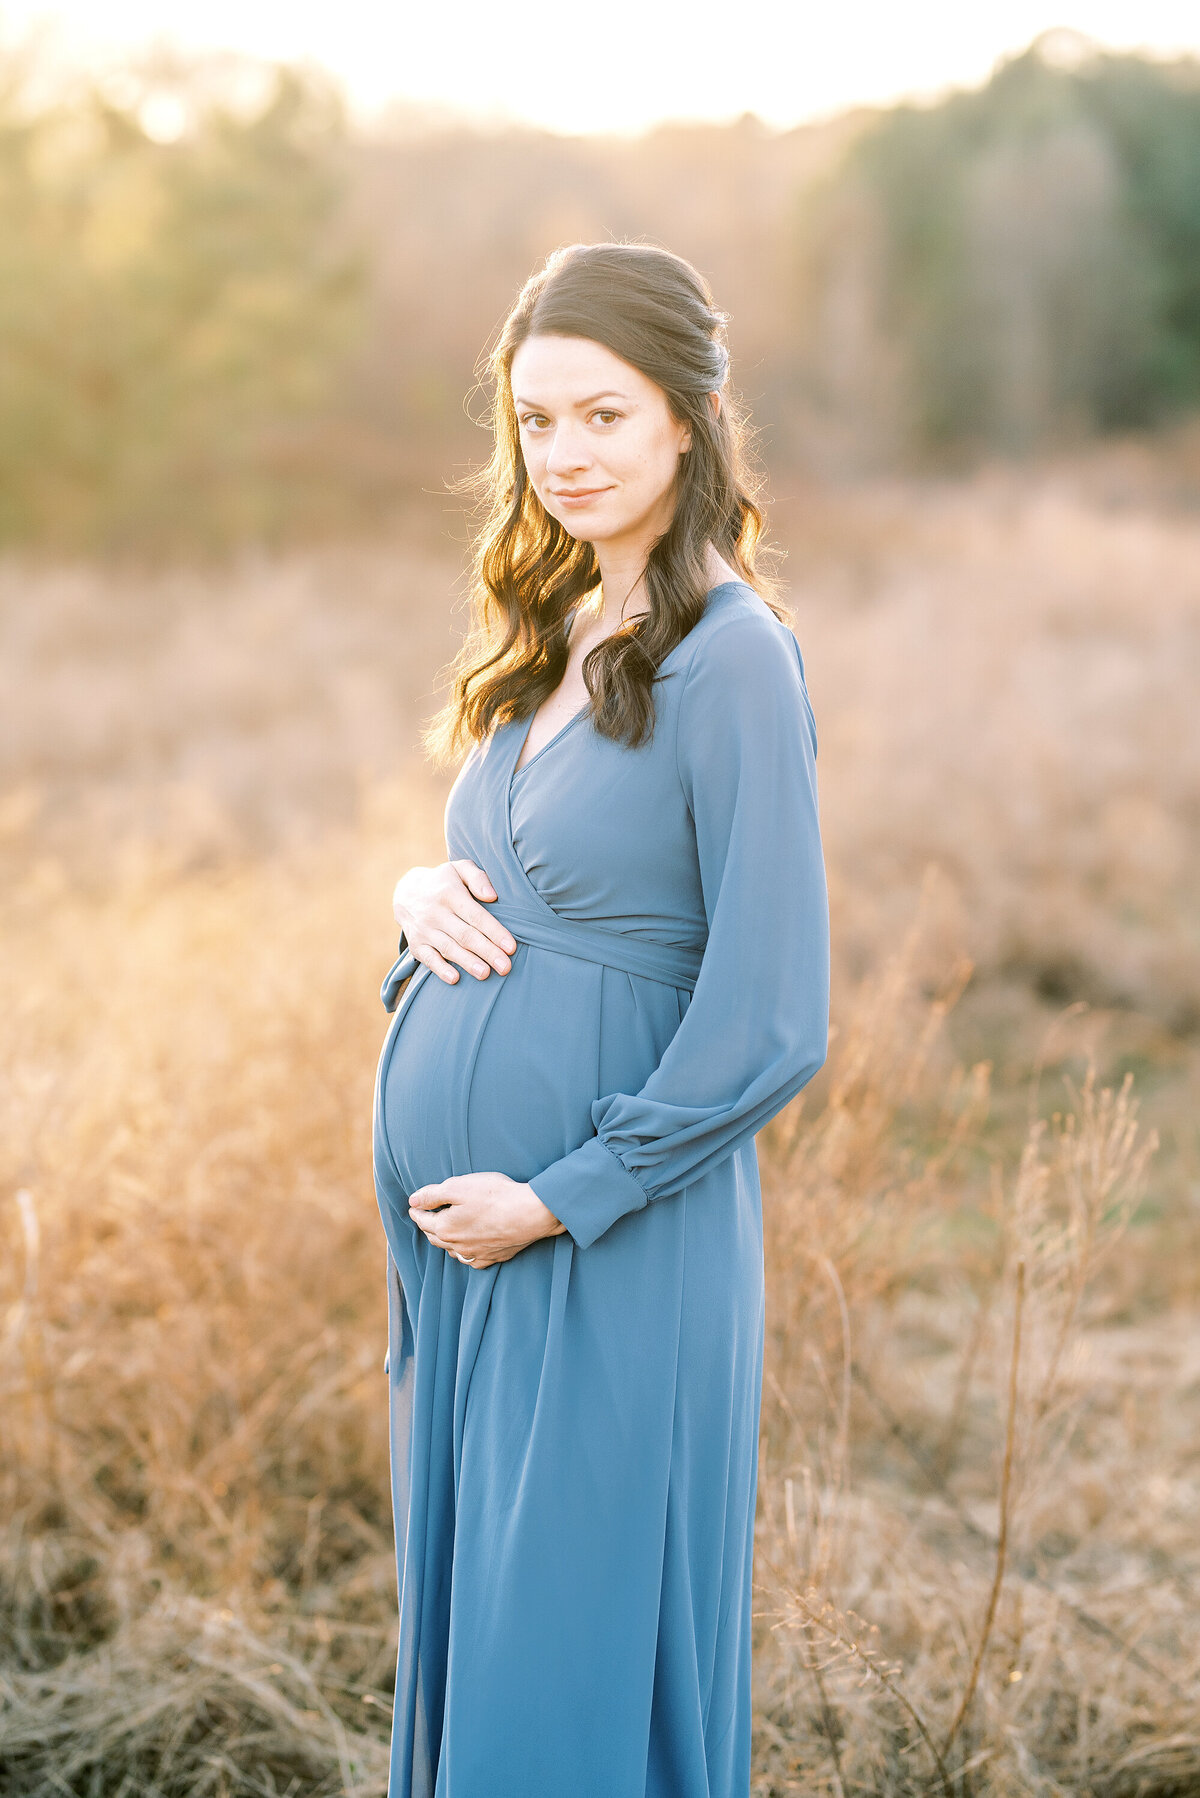 Mom Blue Dress in Field by Lindsey Powell Photography